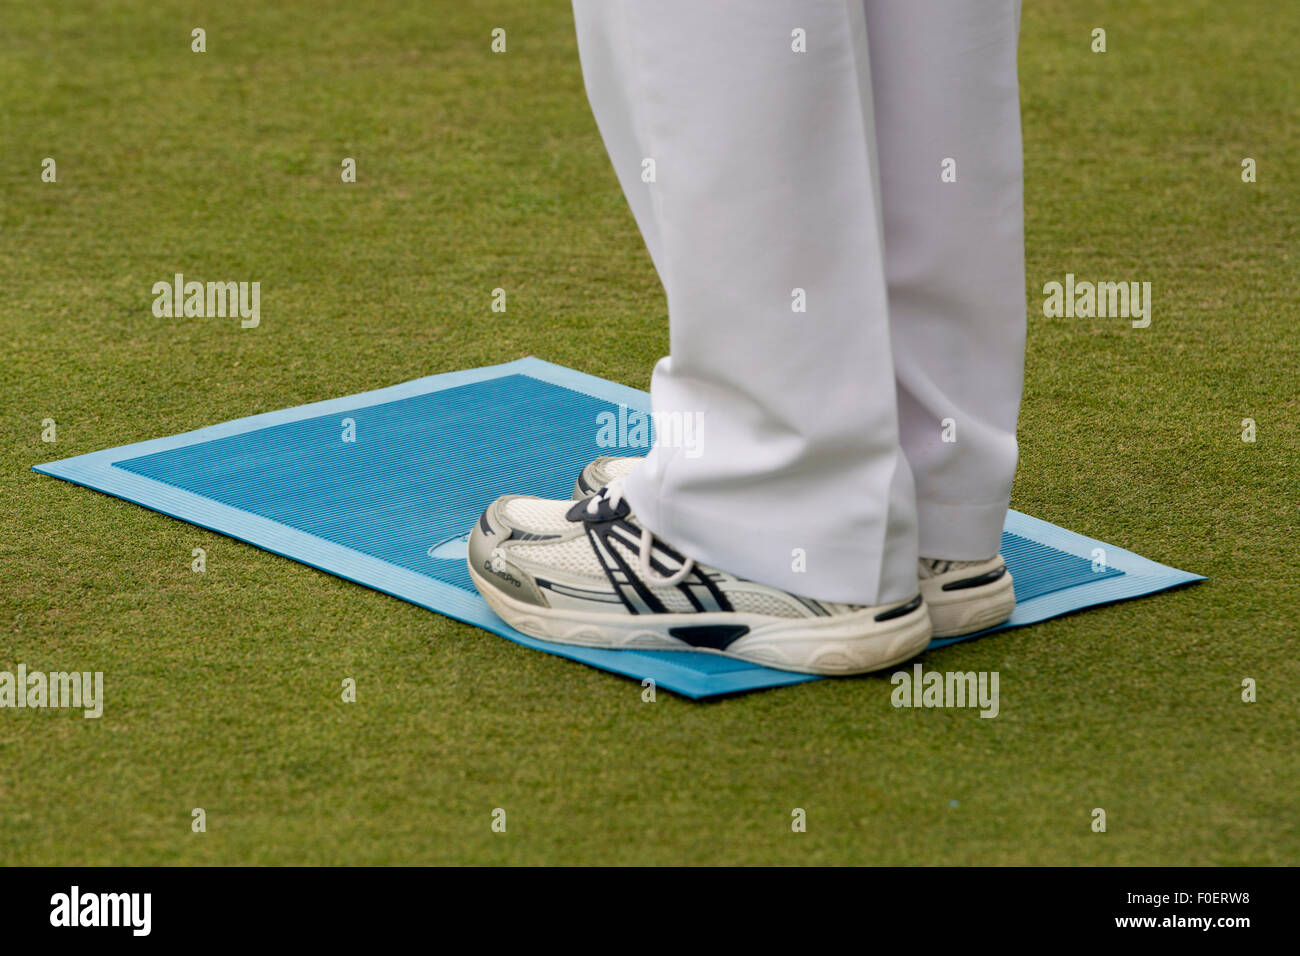 A woman standing on a lawn bowls mat Stock Photo